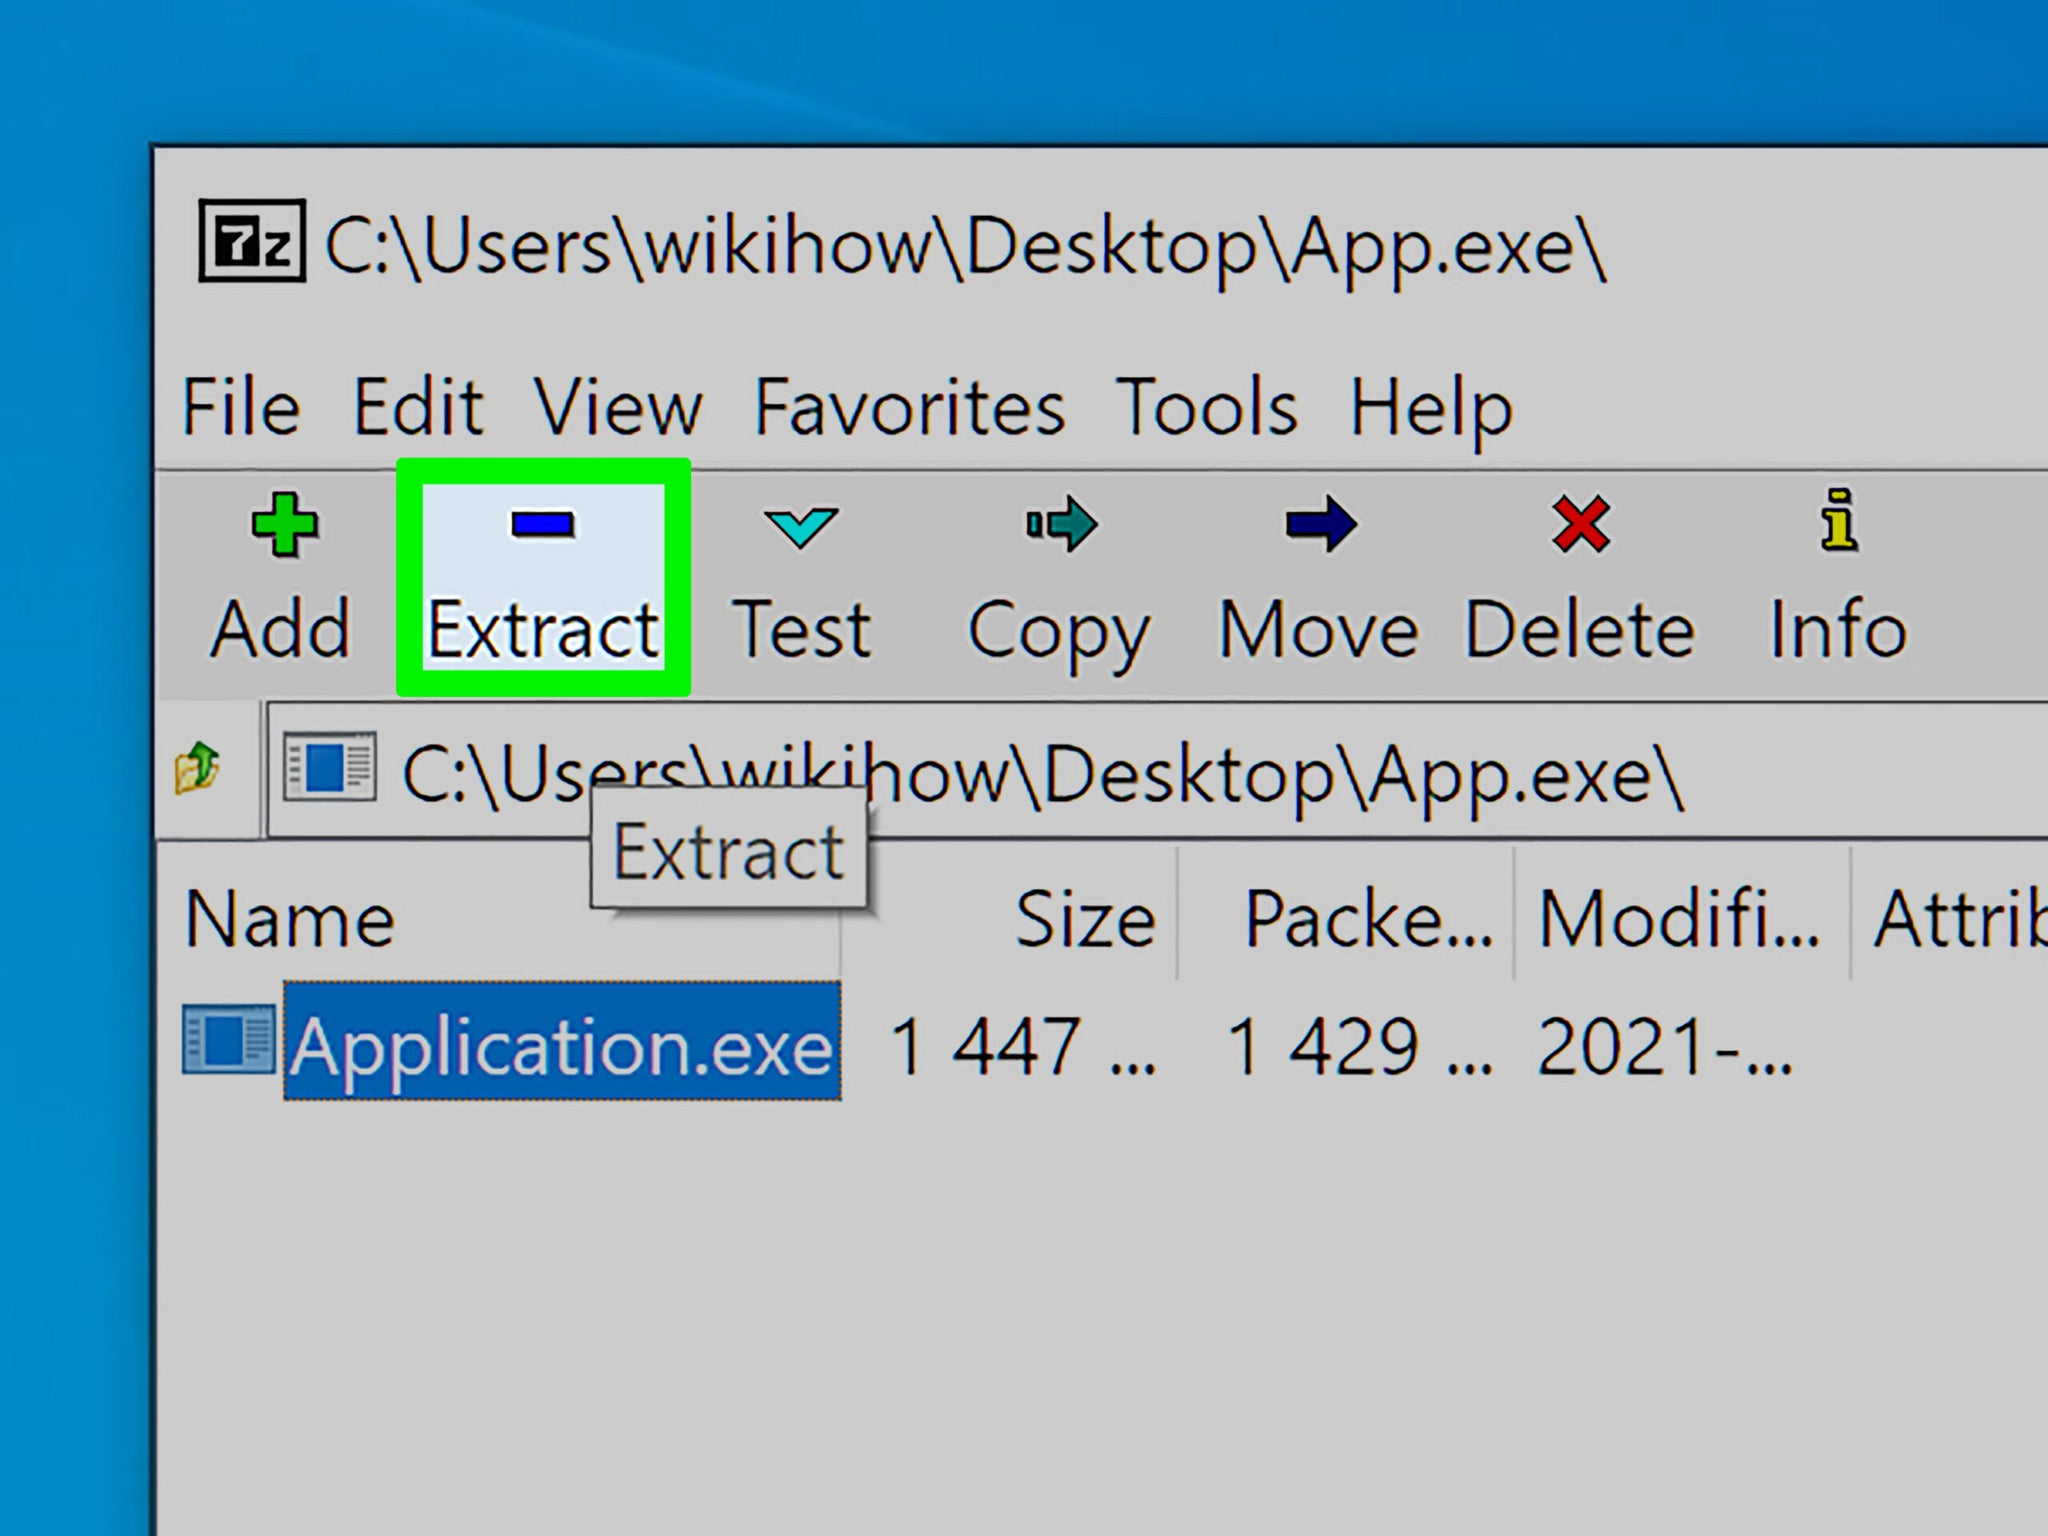 How to Open Exe Files on Windows 10?